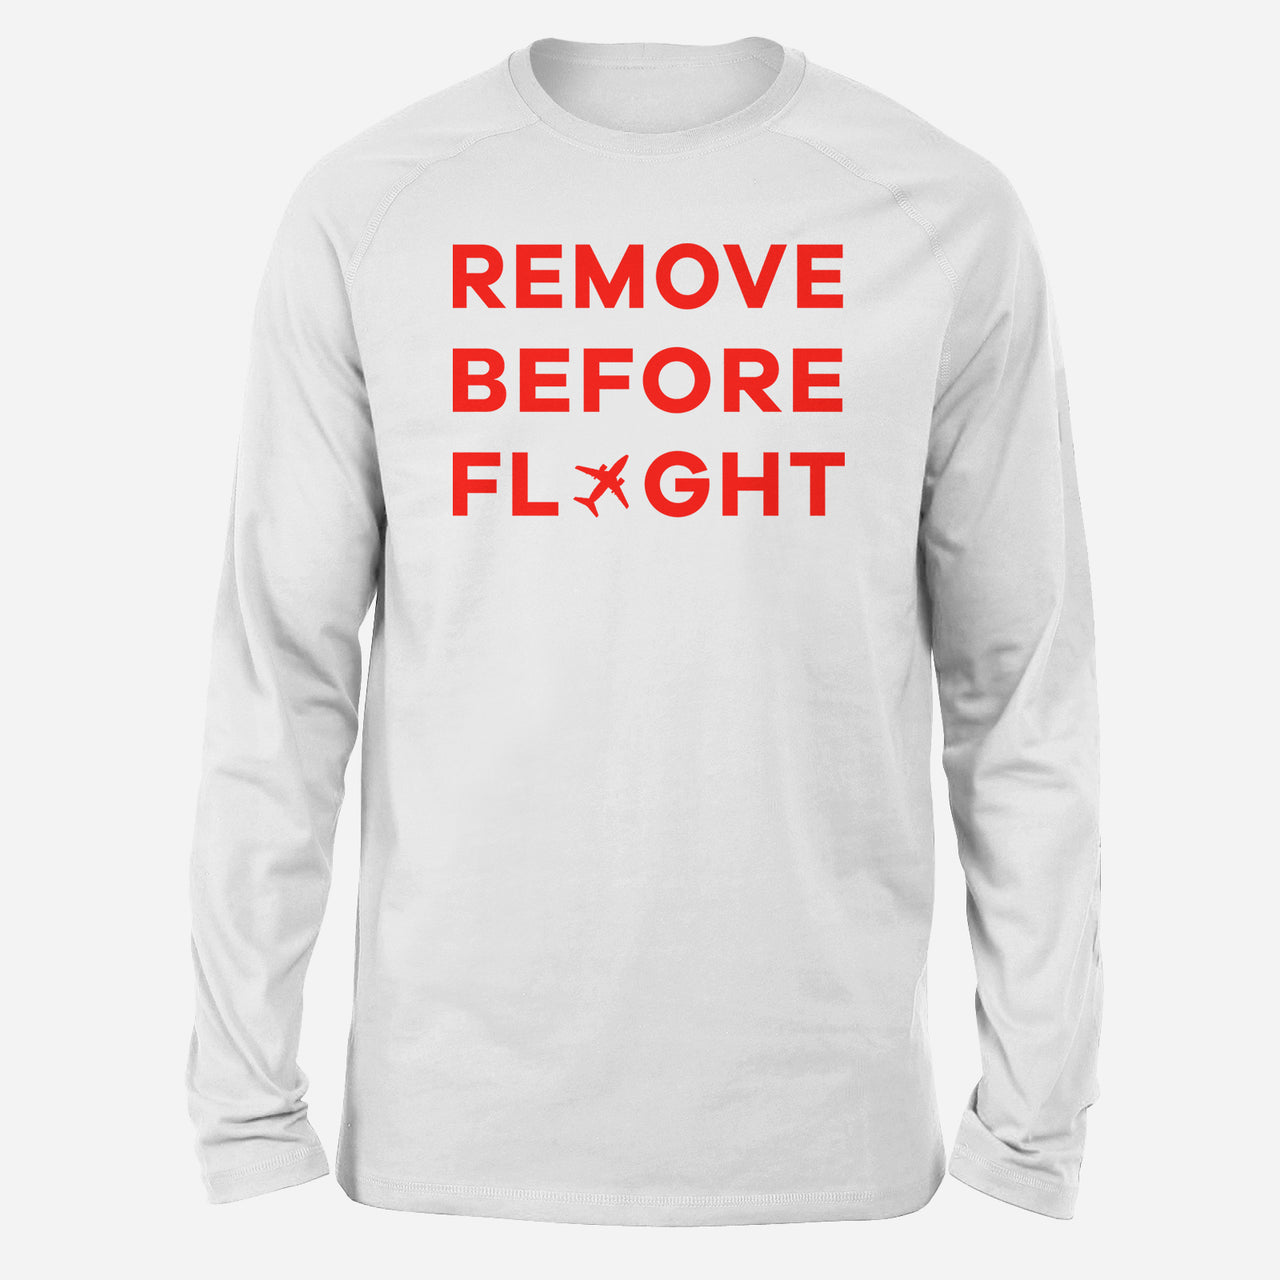 Remove Before Flight Designed Long-Sleeve T-Shirts